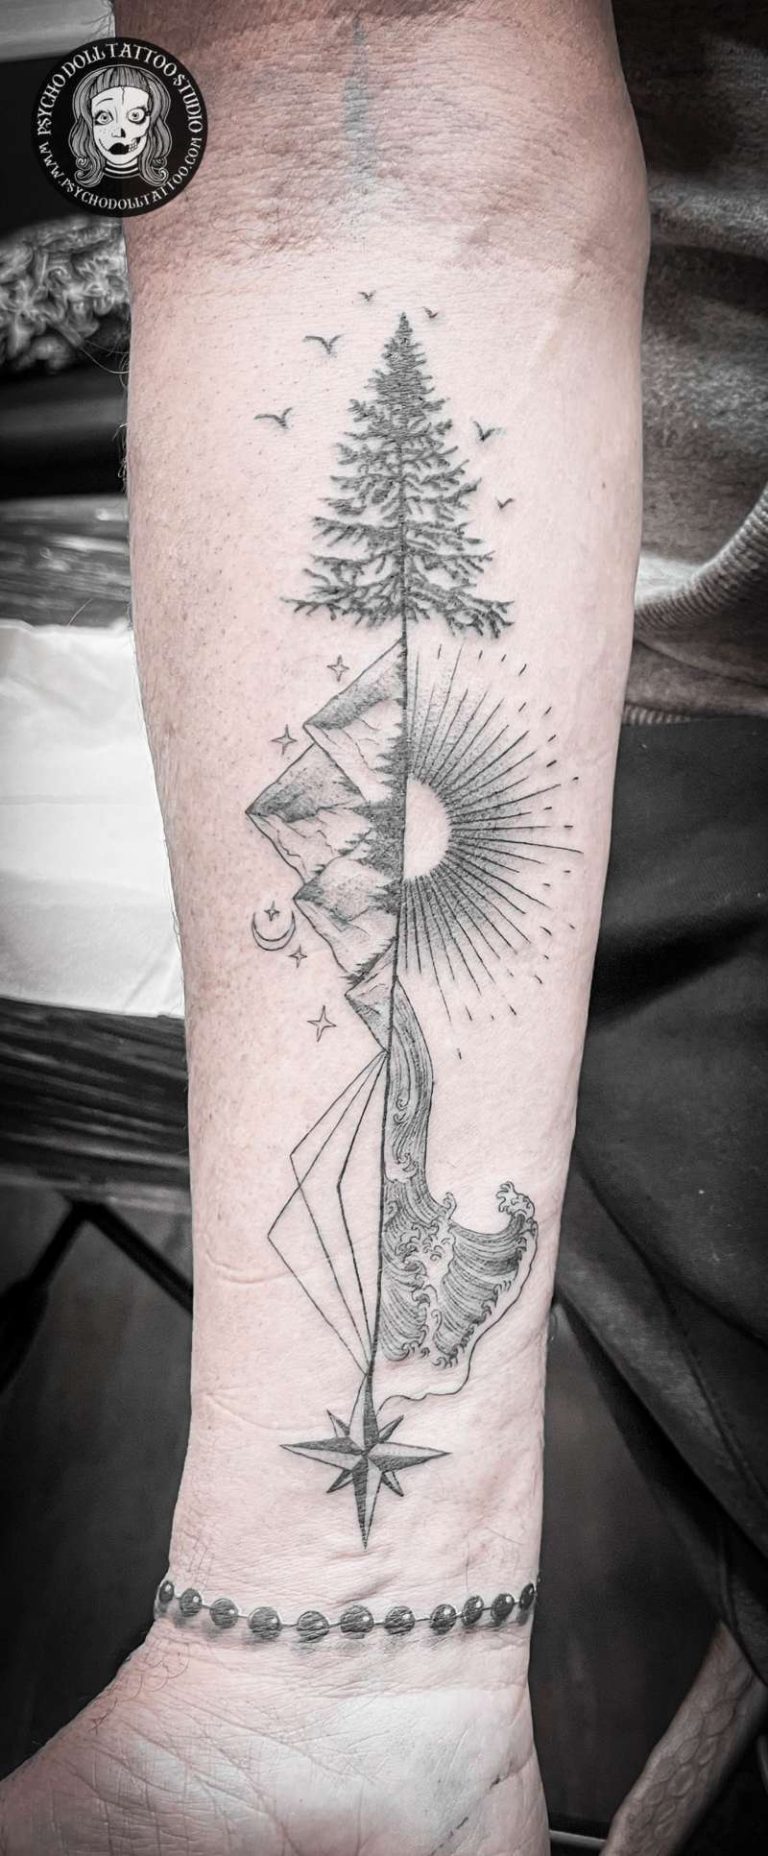 Tattoo with different landscapes